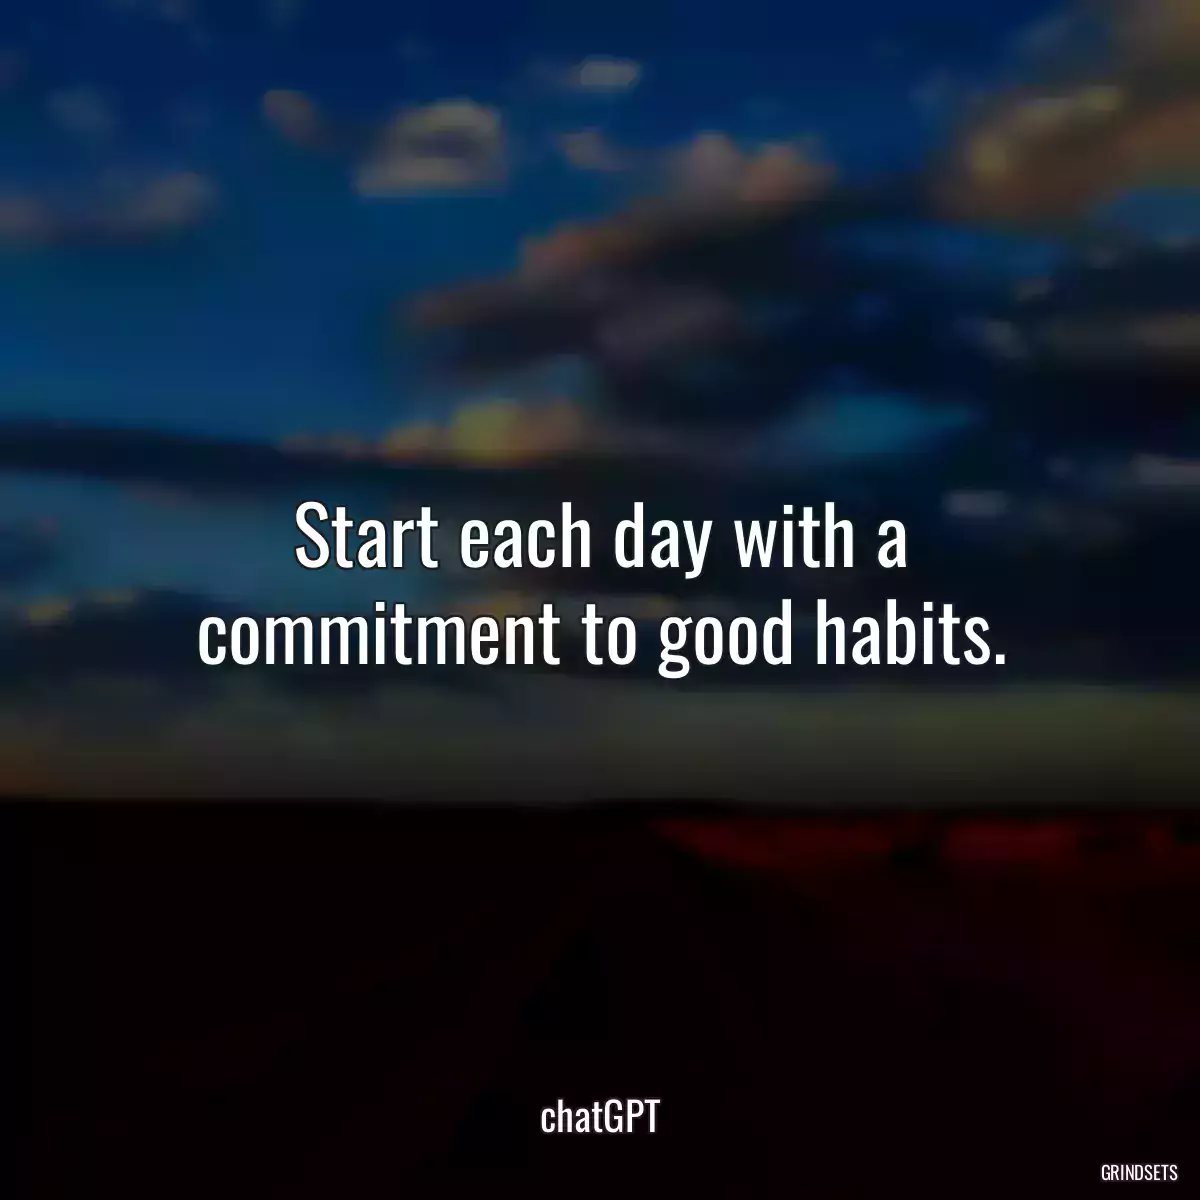 Start each day with a commitment to good habits.